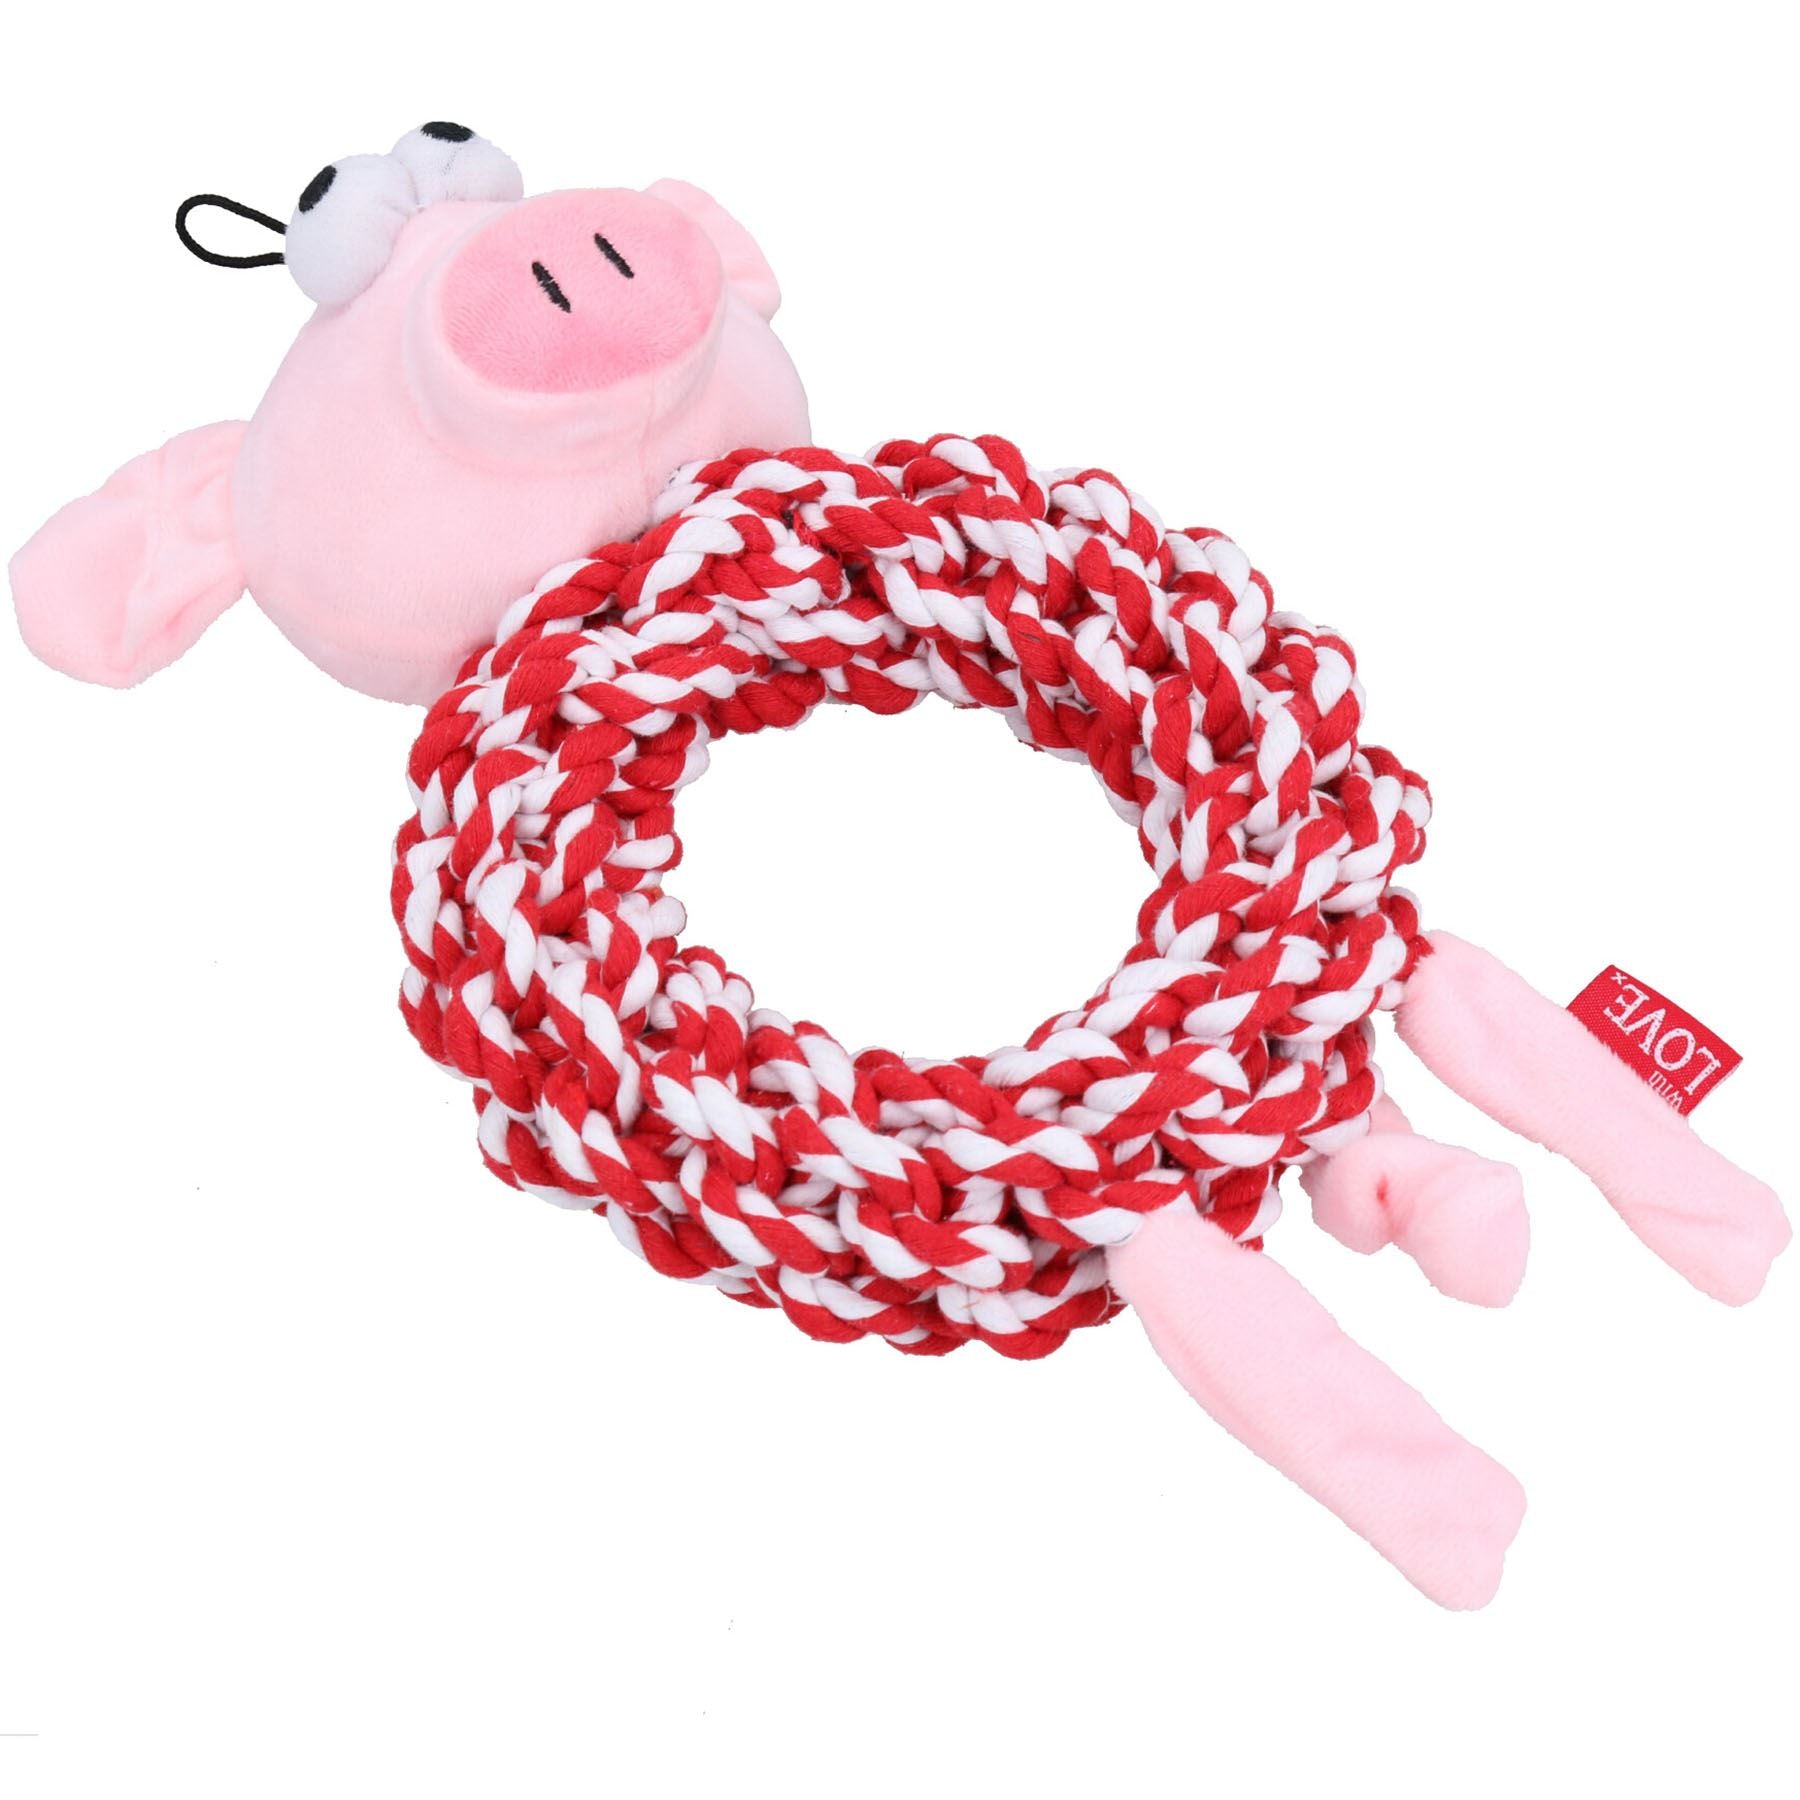 Dog Christmas Gift Knottie Ring Pig in Blanket Plush Rope Squeaky Play Toy